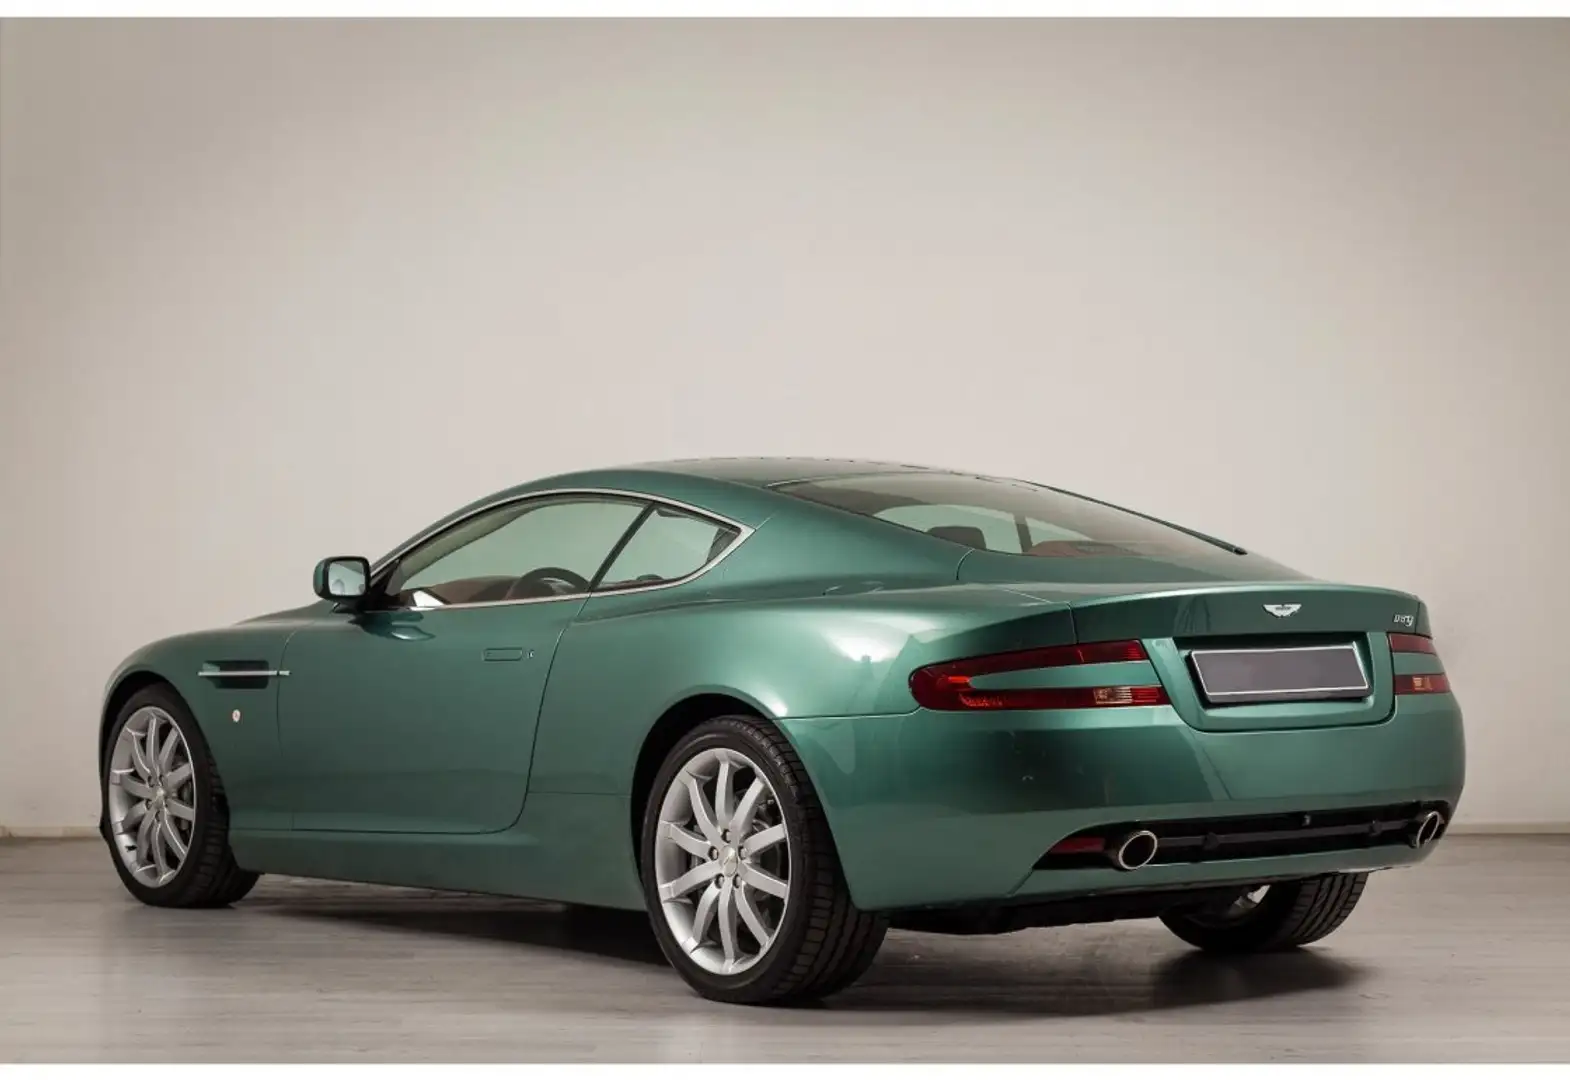 Aston Martin DB9 DB9 Coupe Touchtronic Green - 2